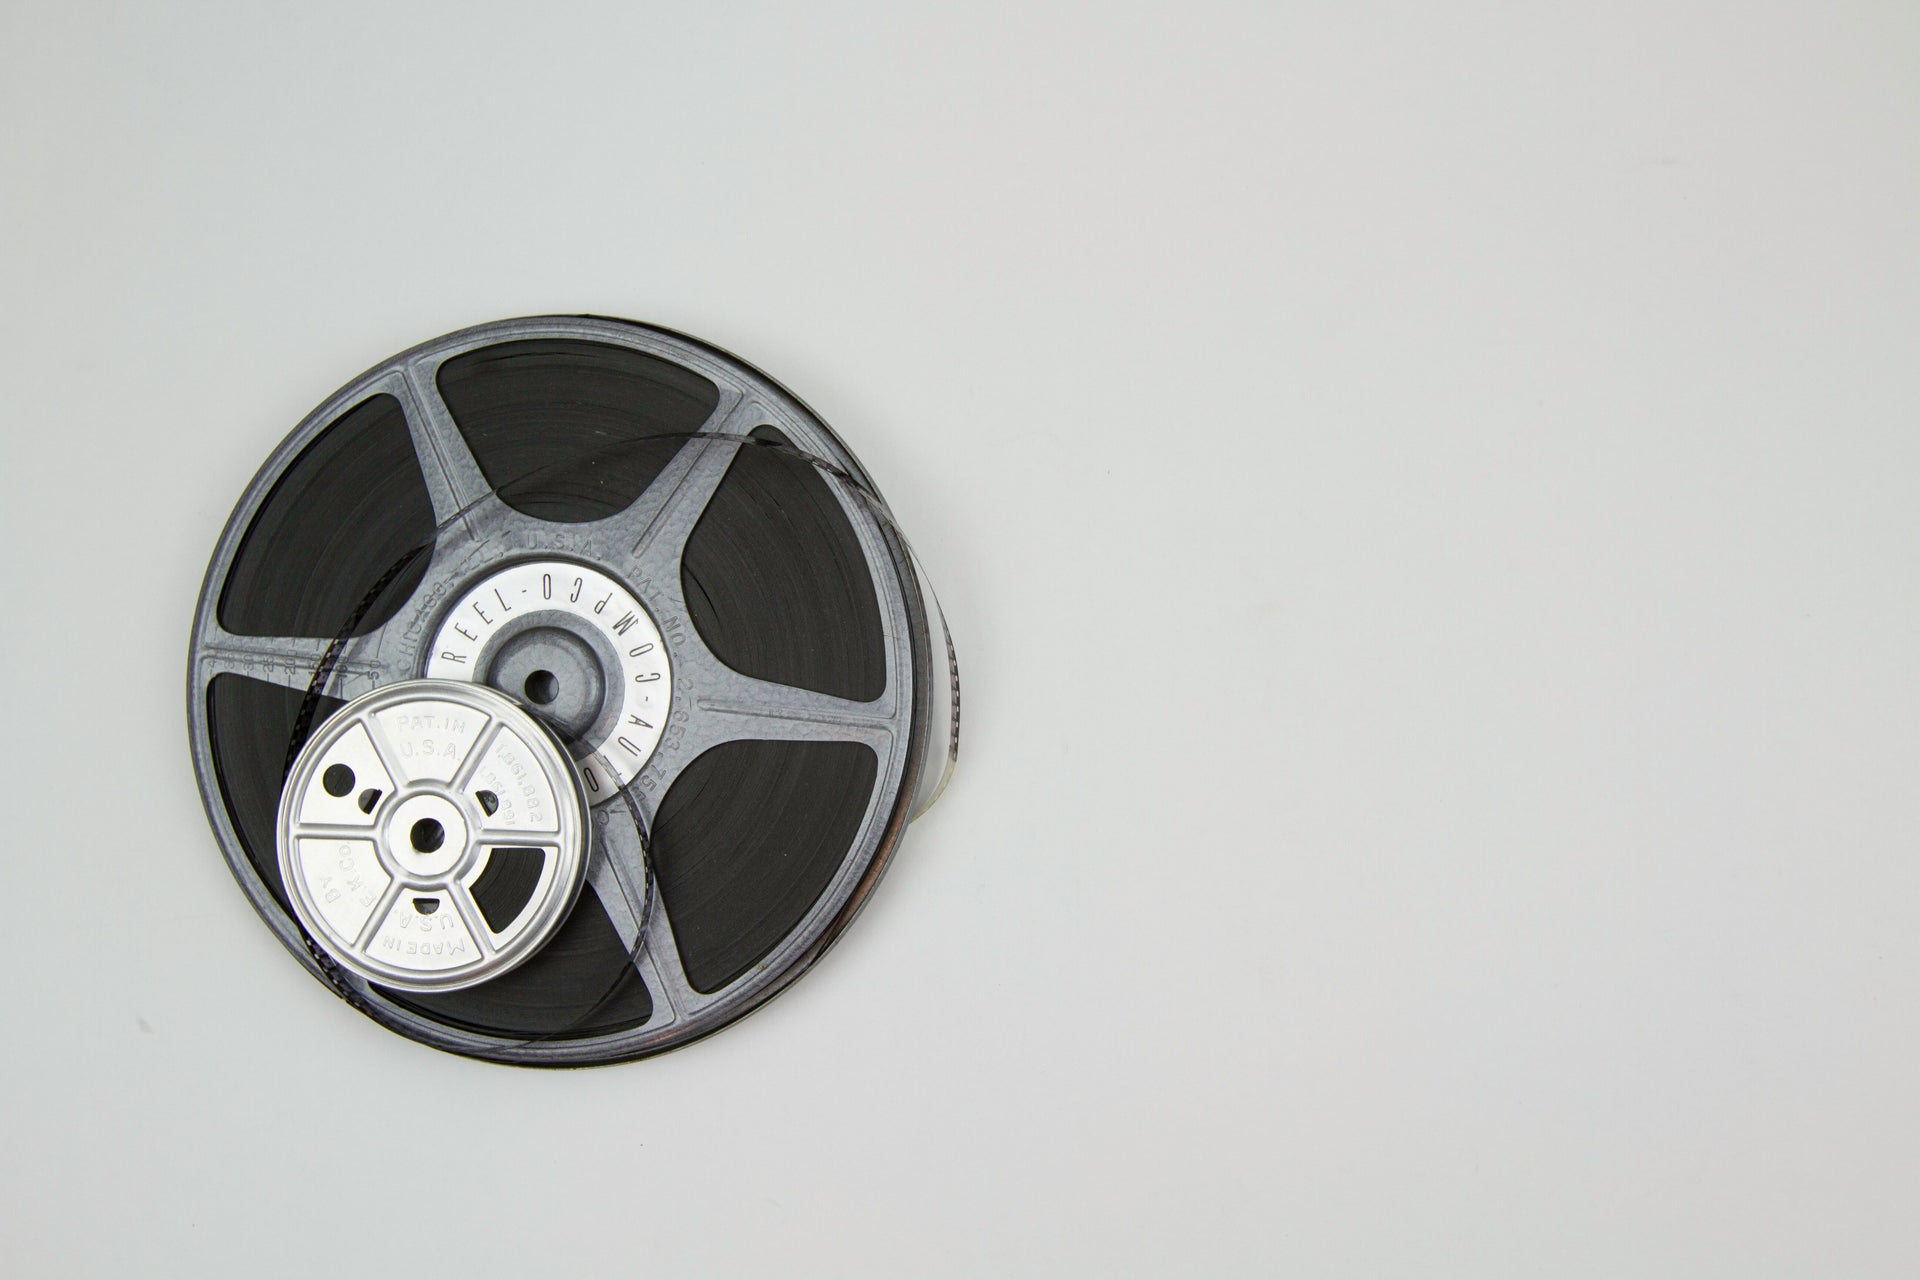 Are Film Reels Still Being Used?